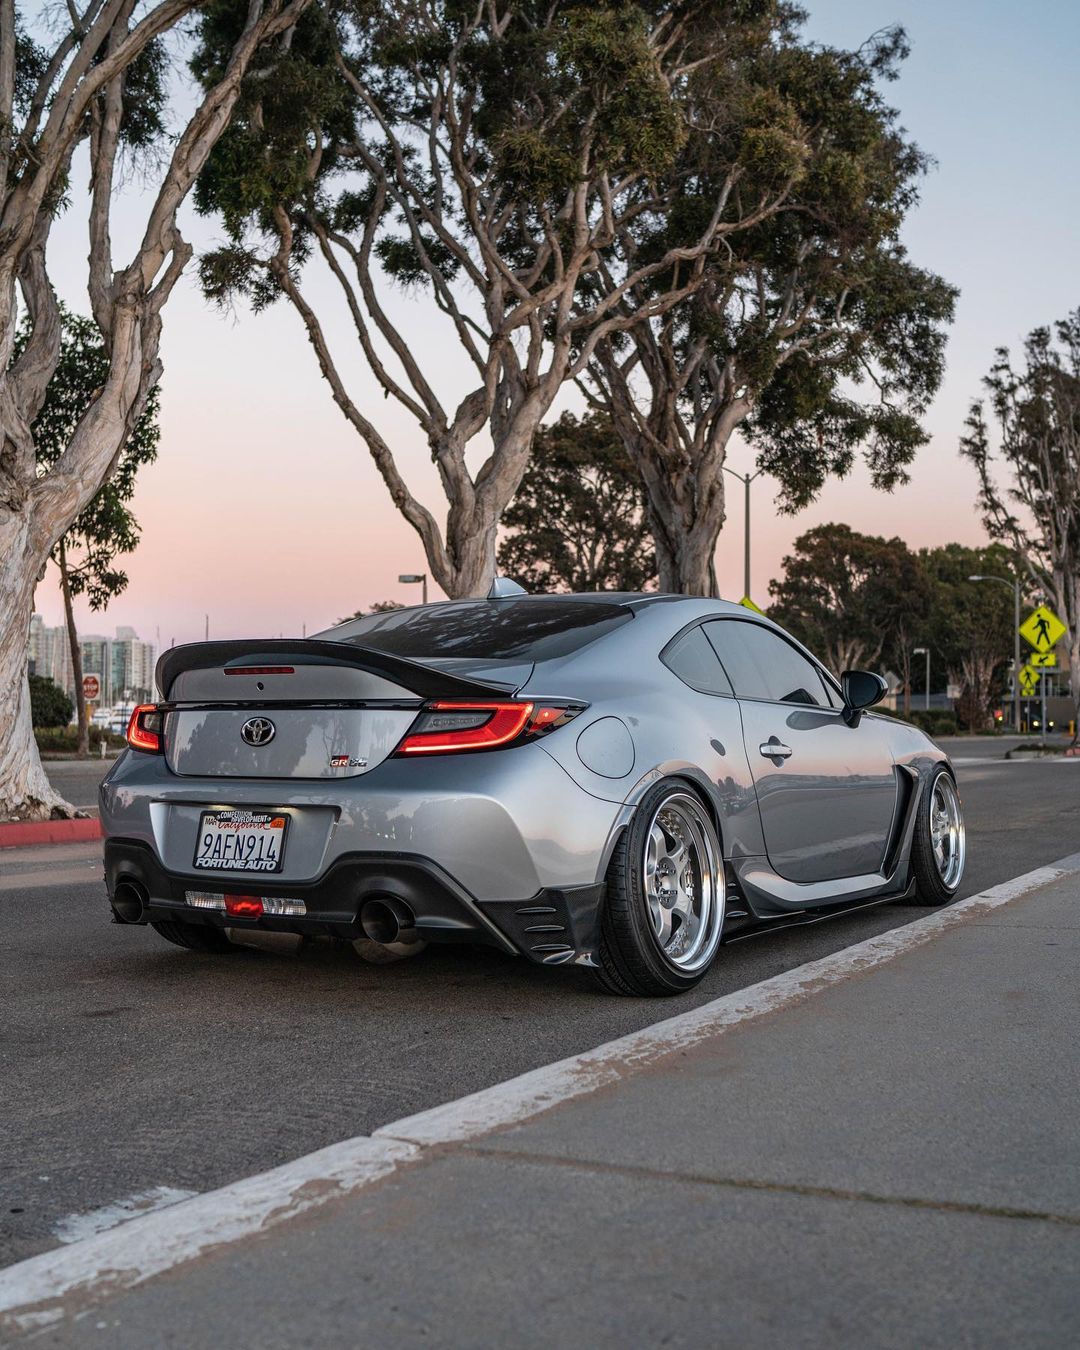 Check our price and buy Street hunter widebody kit for Toyota BRZ/GR86!